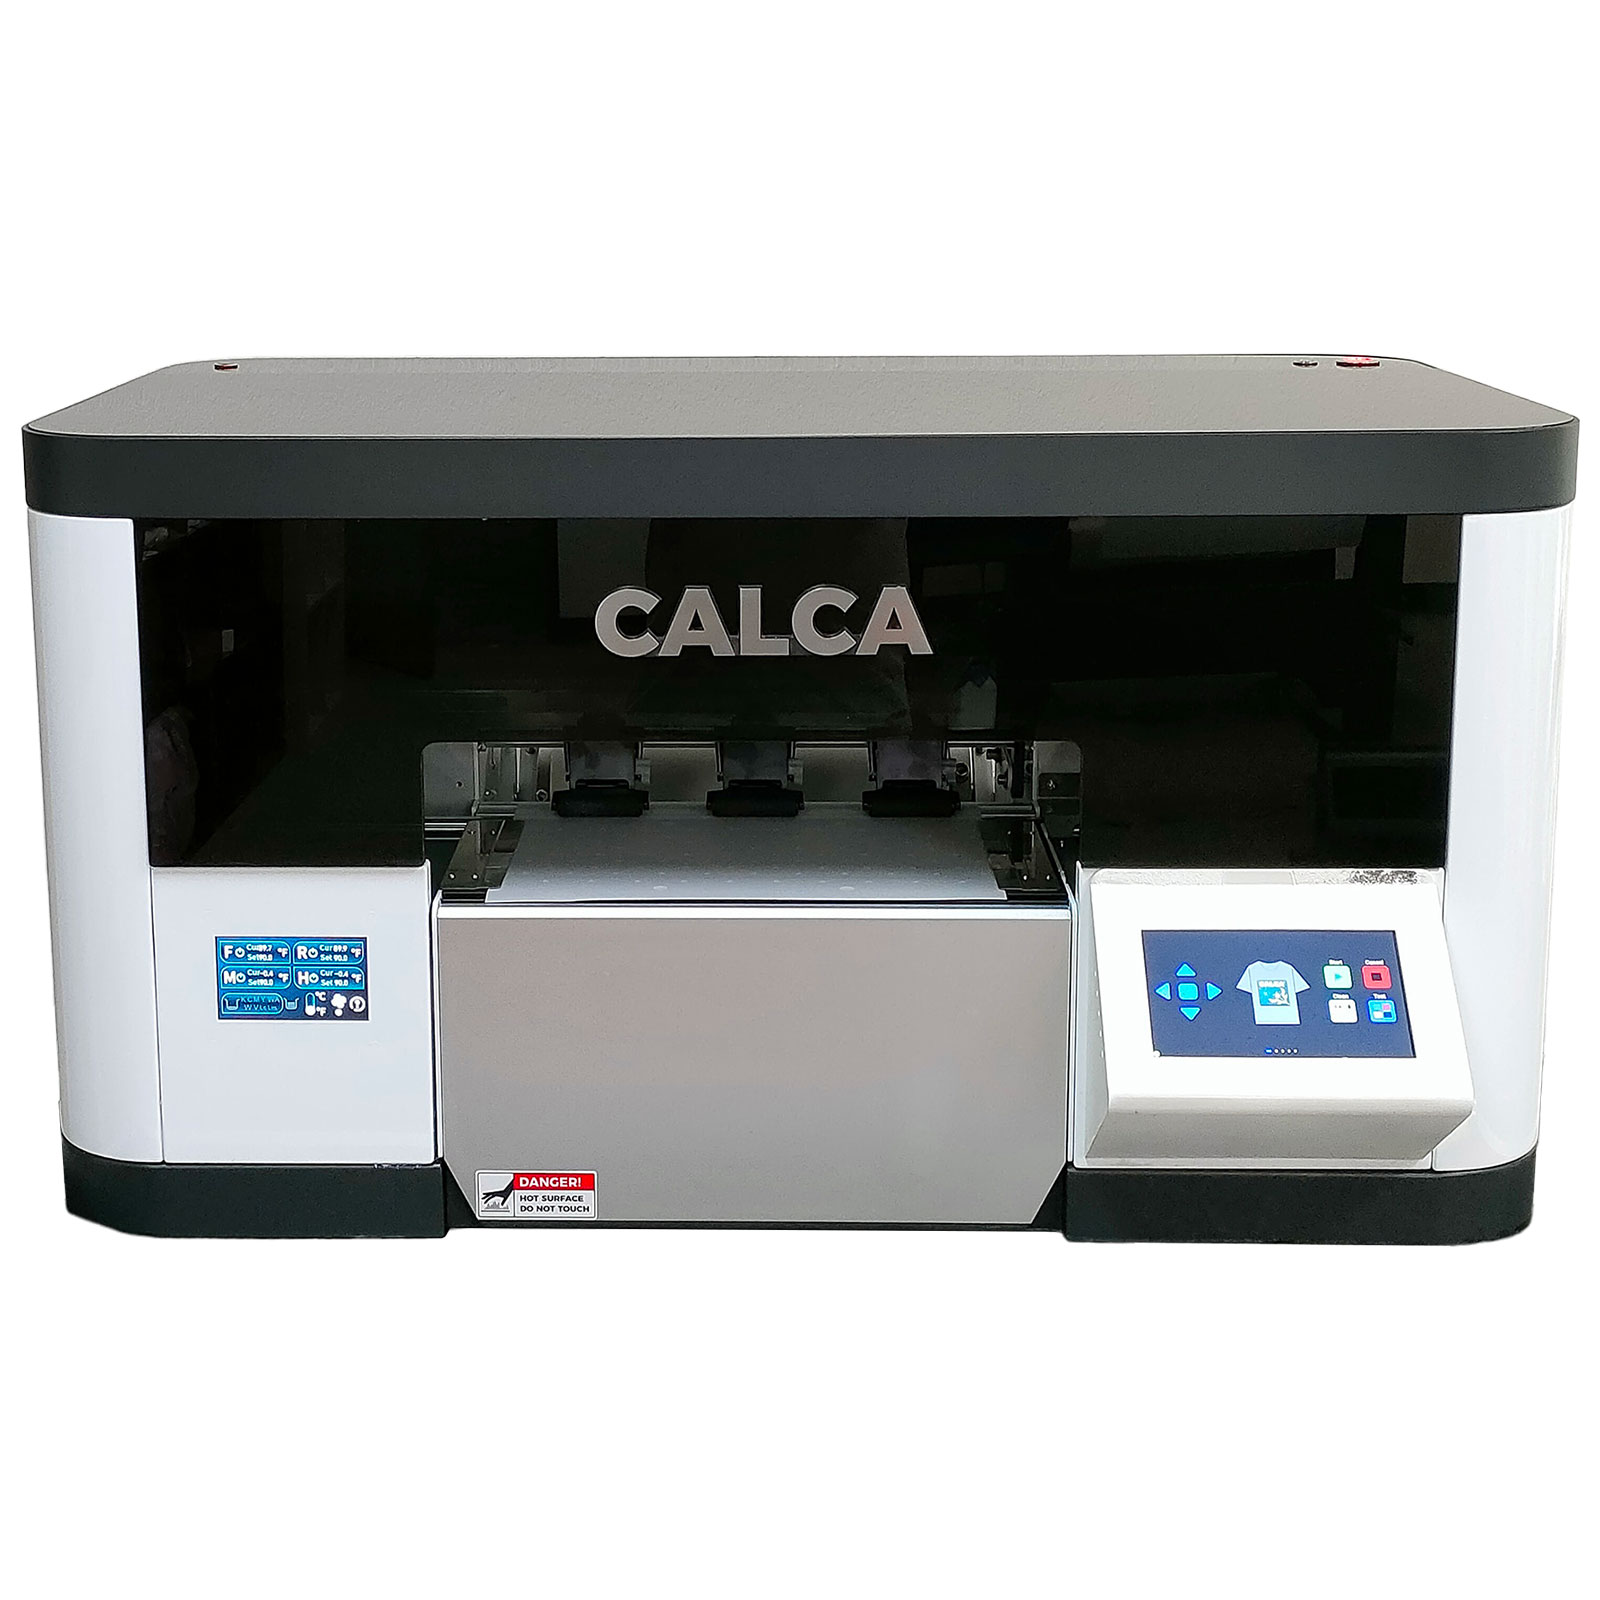 CALCA ProStar13 Wifi DTF Printer With Dual Epson F1080-A1 (XP-600), Easy Operation